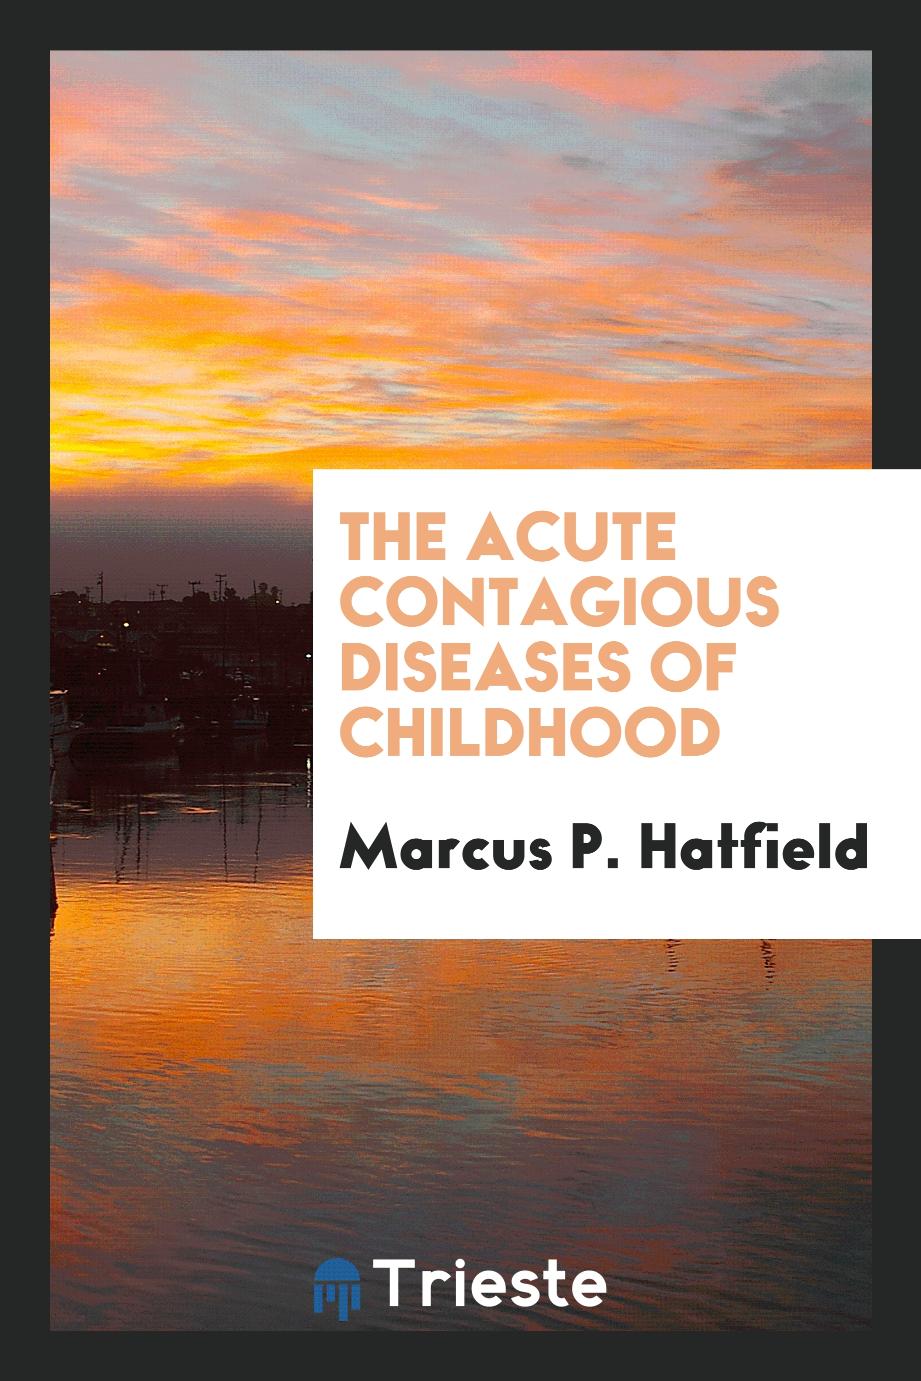 The Acute Contagious Diseases of Childhood